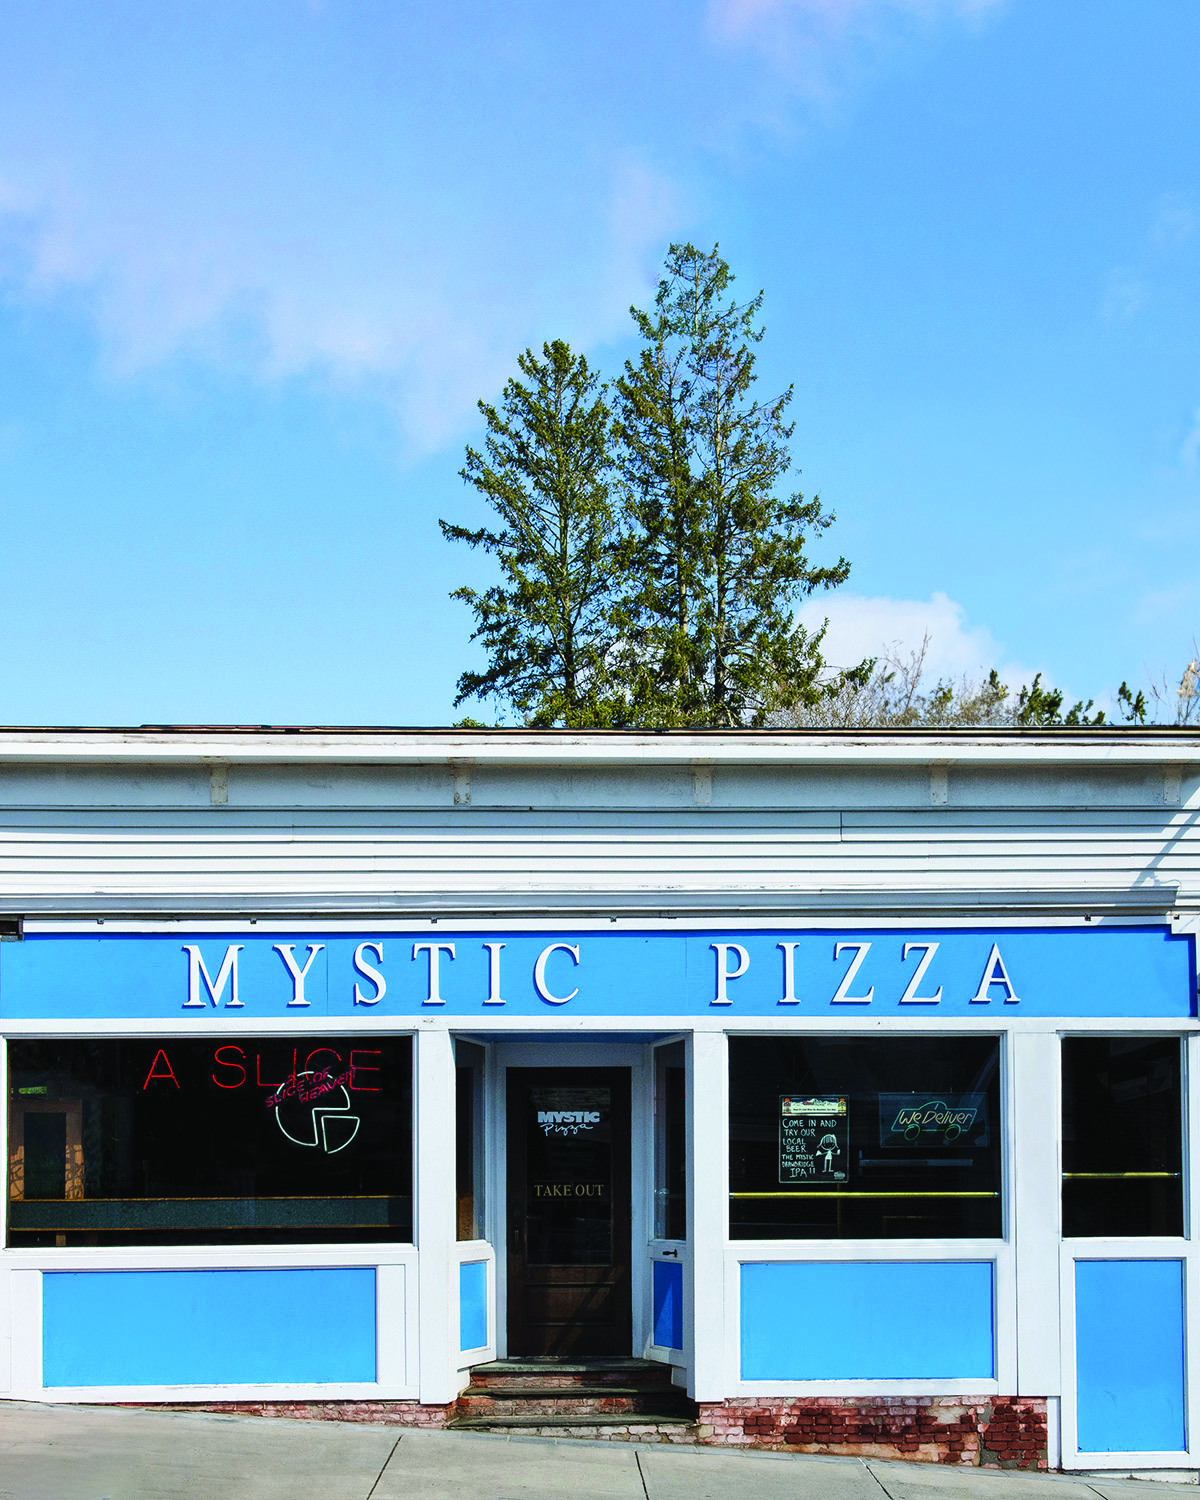 photograph of mystic pizza restaurant storefront. There is a blue sign above the door and neon signs in the window. the sky in the background is clear and blue. 